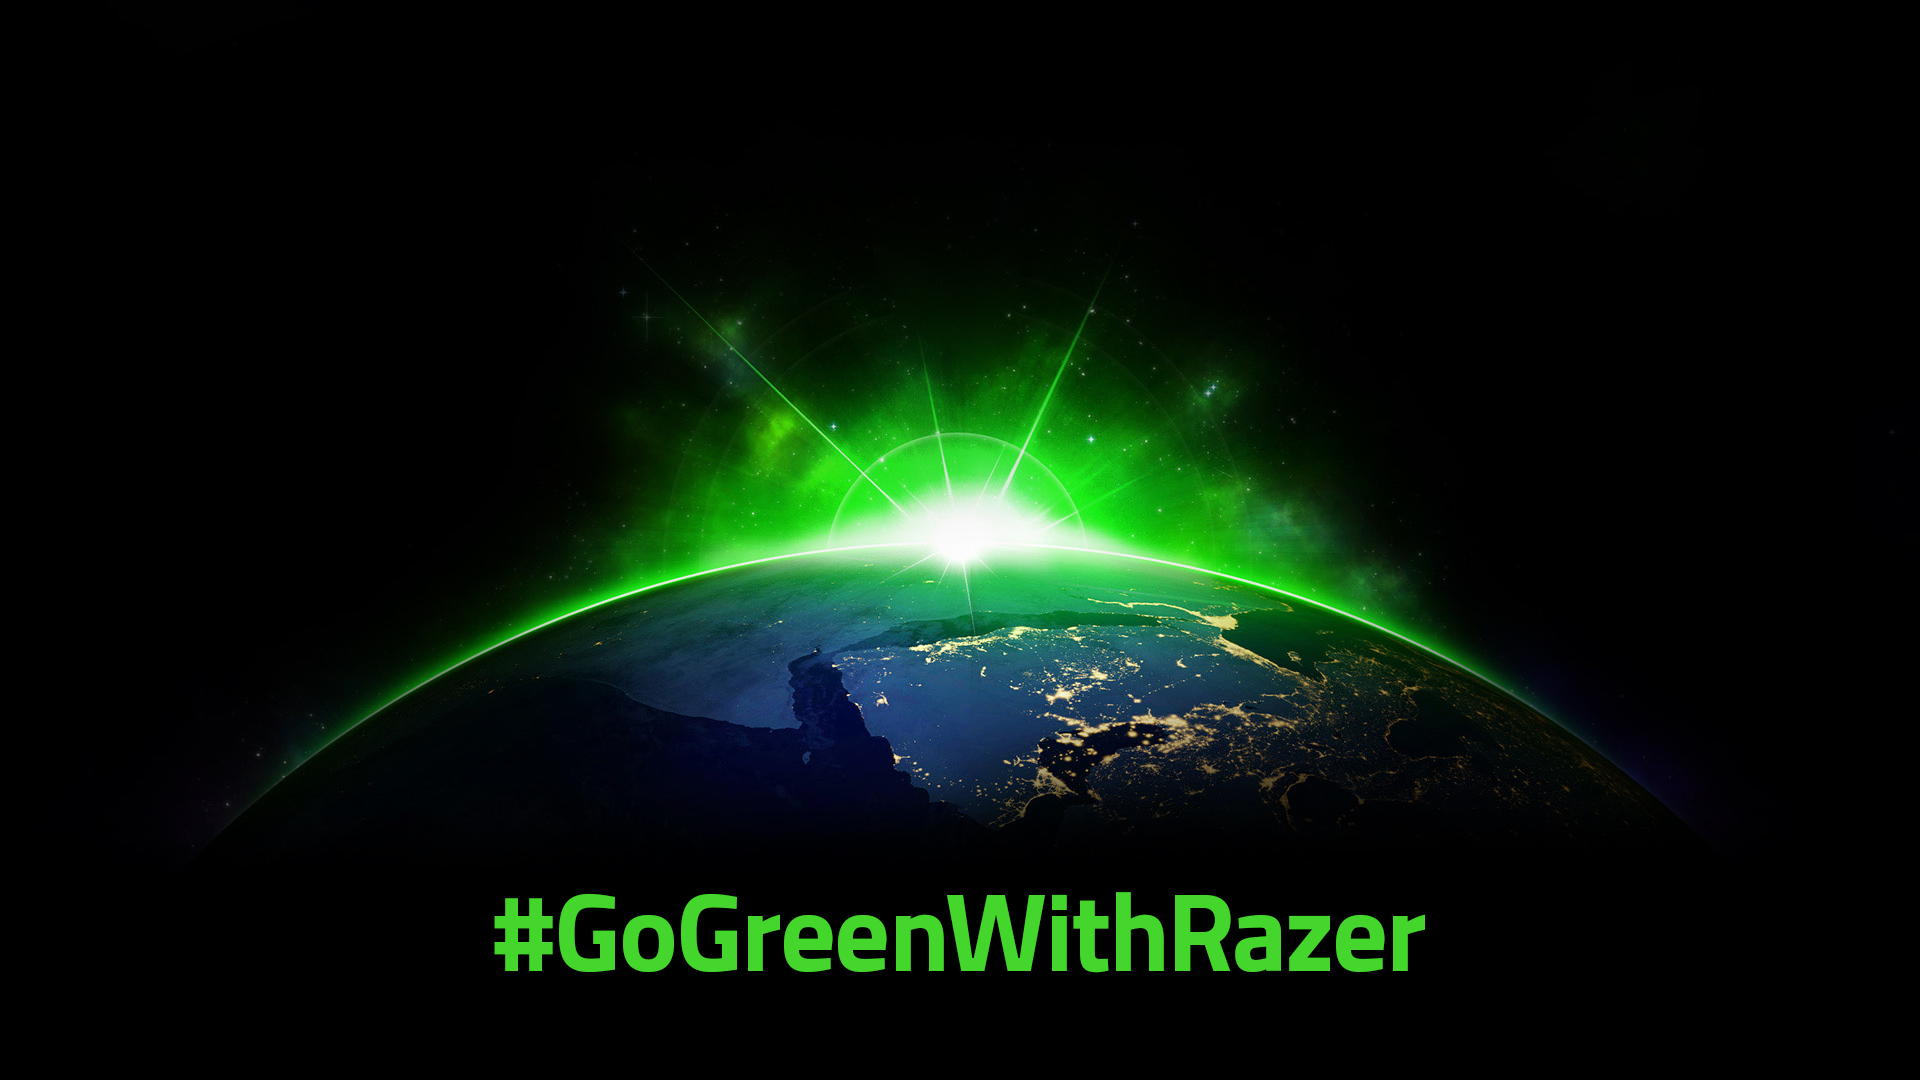 Razer Commits to a Greener, More Sustainable Future for All to Game In